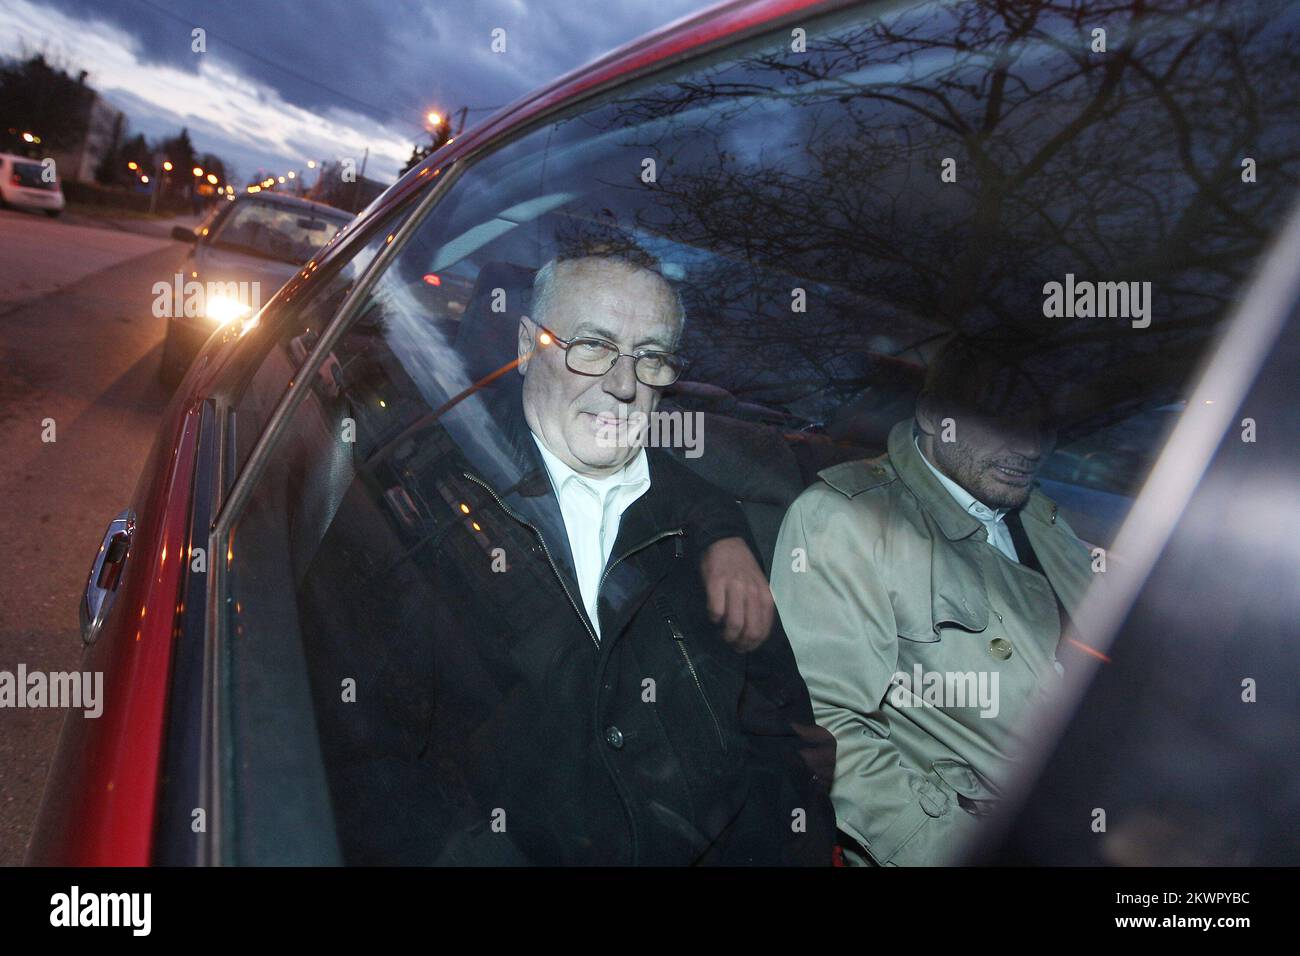 03.01.2014., Zagreb, Croatia - Josip Perkovic is released from jail after his lawyer had filed an appeal against the detention. He was taken from his home on Wednesday in the city for questioning after Croatia implemented the European Arrest Warrant ??? the EAW. Josip Perkovic was a senior official in the intelligence networks in Yugoslavia and is wanted in Germany for his role in the assassination there of Yugoslav dissident Stjepan Djurekovic in 1983.Photo: Zeljko Lukunic/PIXSELL Stock Photo